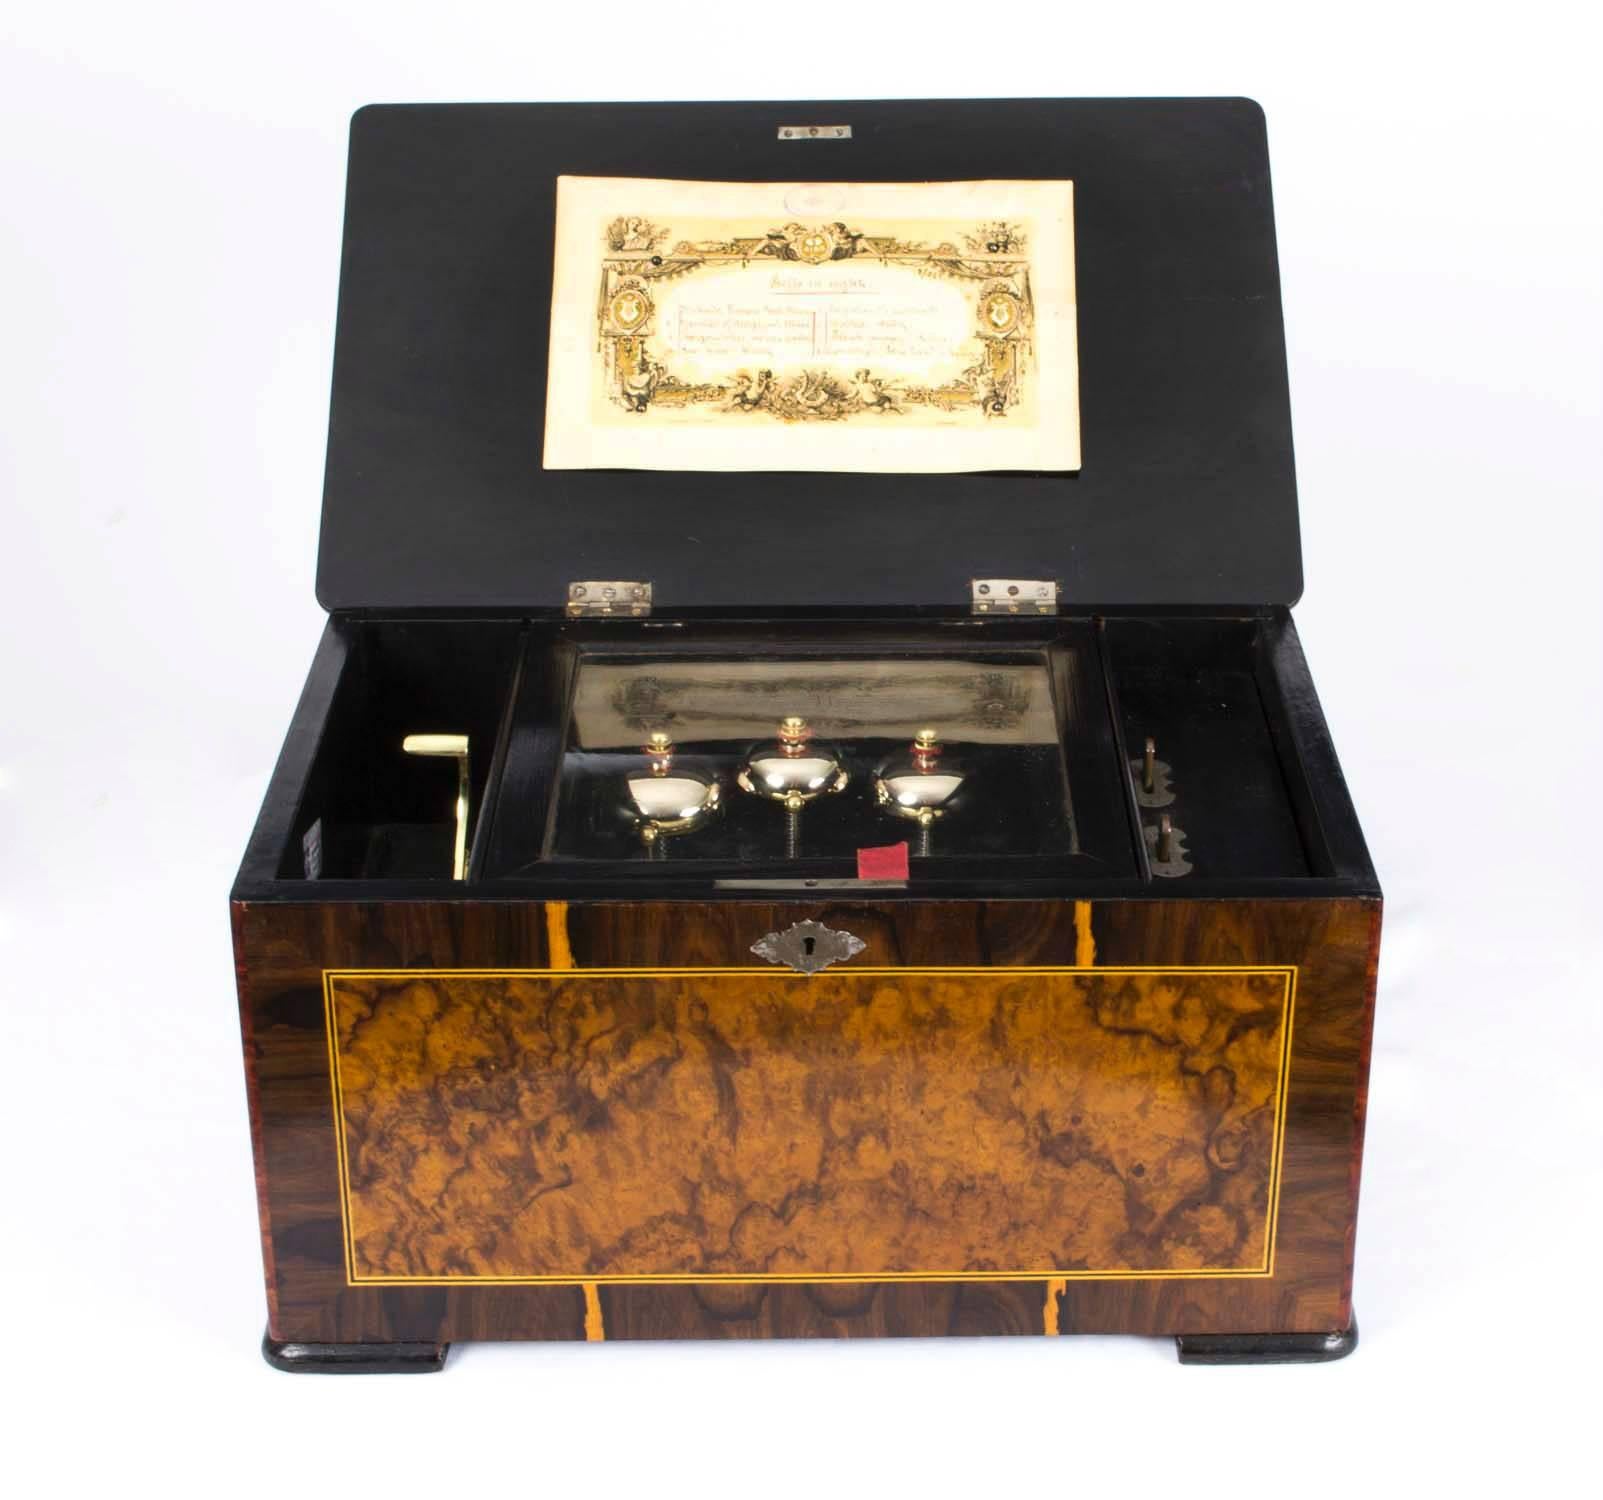 This is a lovely antique Swiss 8 air cylinder music box with three bells in view, manufactured in Switzerland and retailed by Lith Picard - Lion Geneve. 

The case has been accomplished in coromandel and burr walnut with beautiful decorative